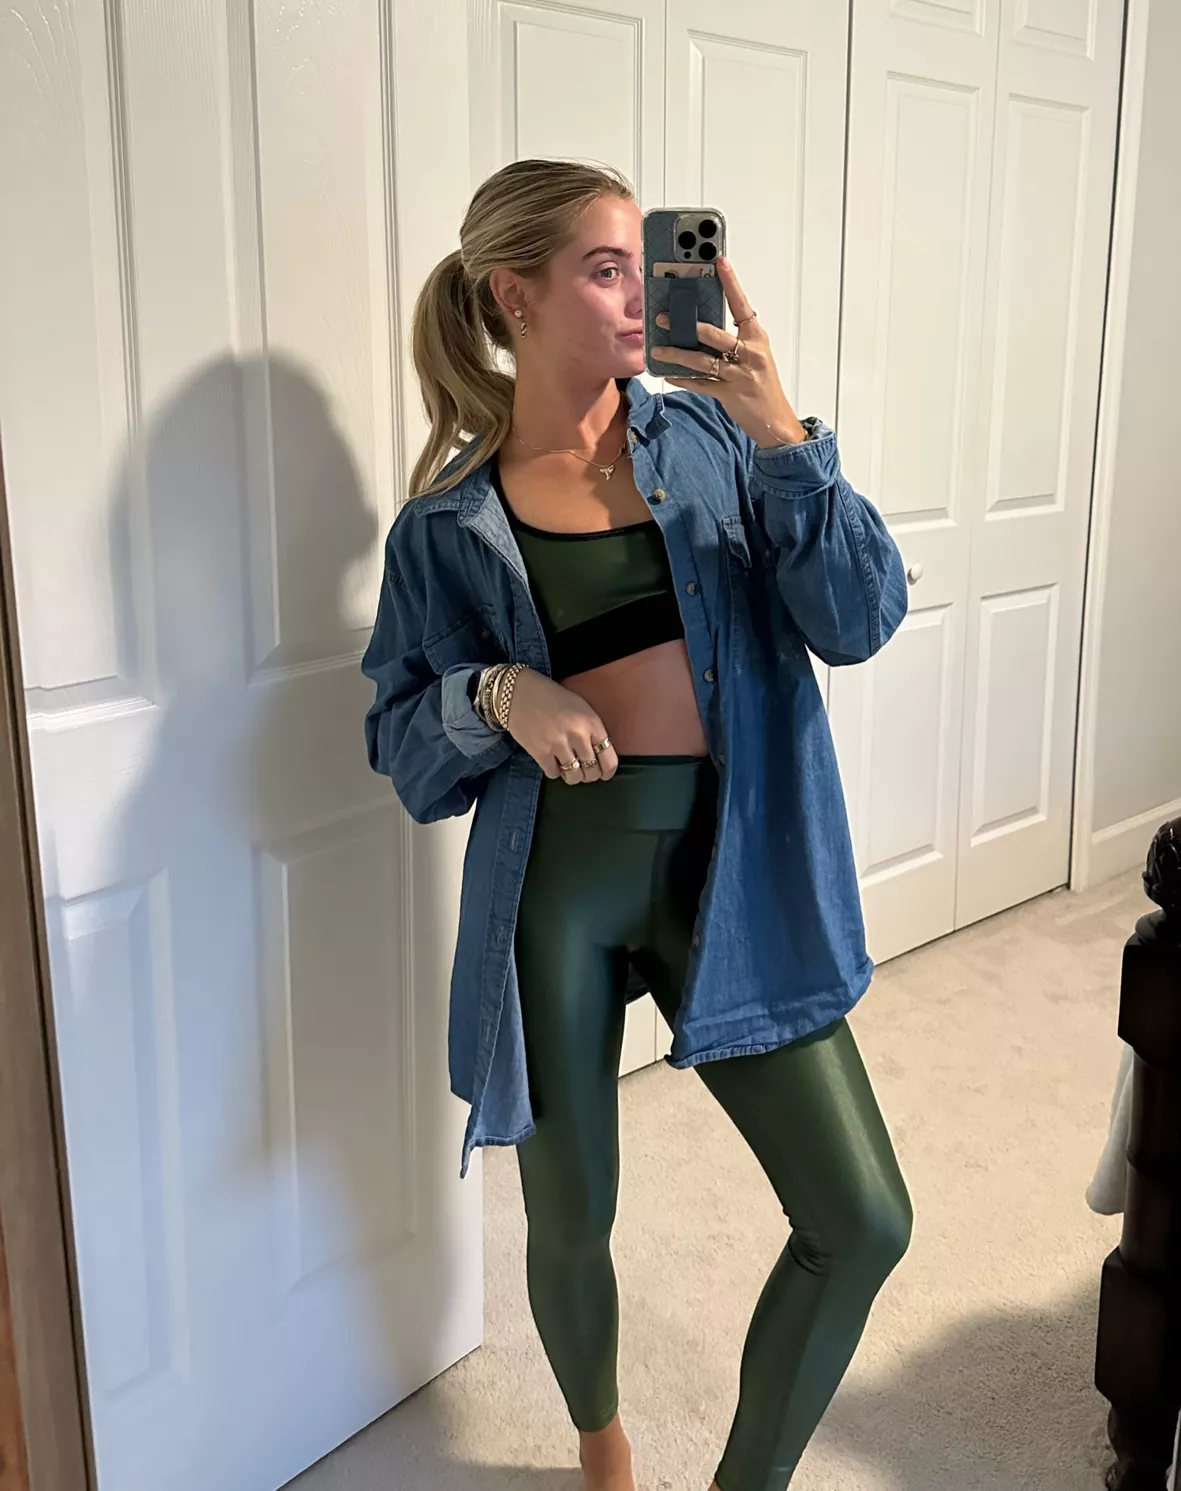 Stylish Metallic Leggings Outfit for Active Wear